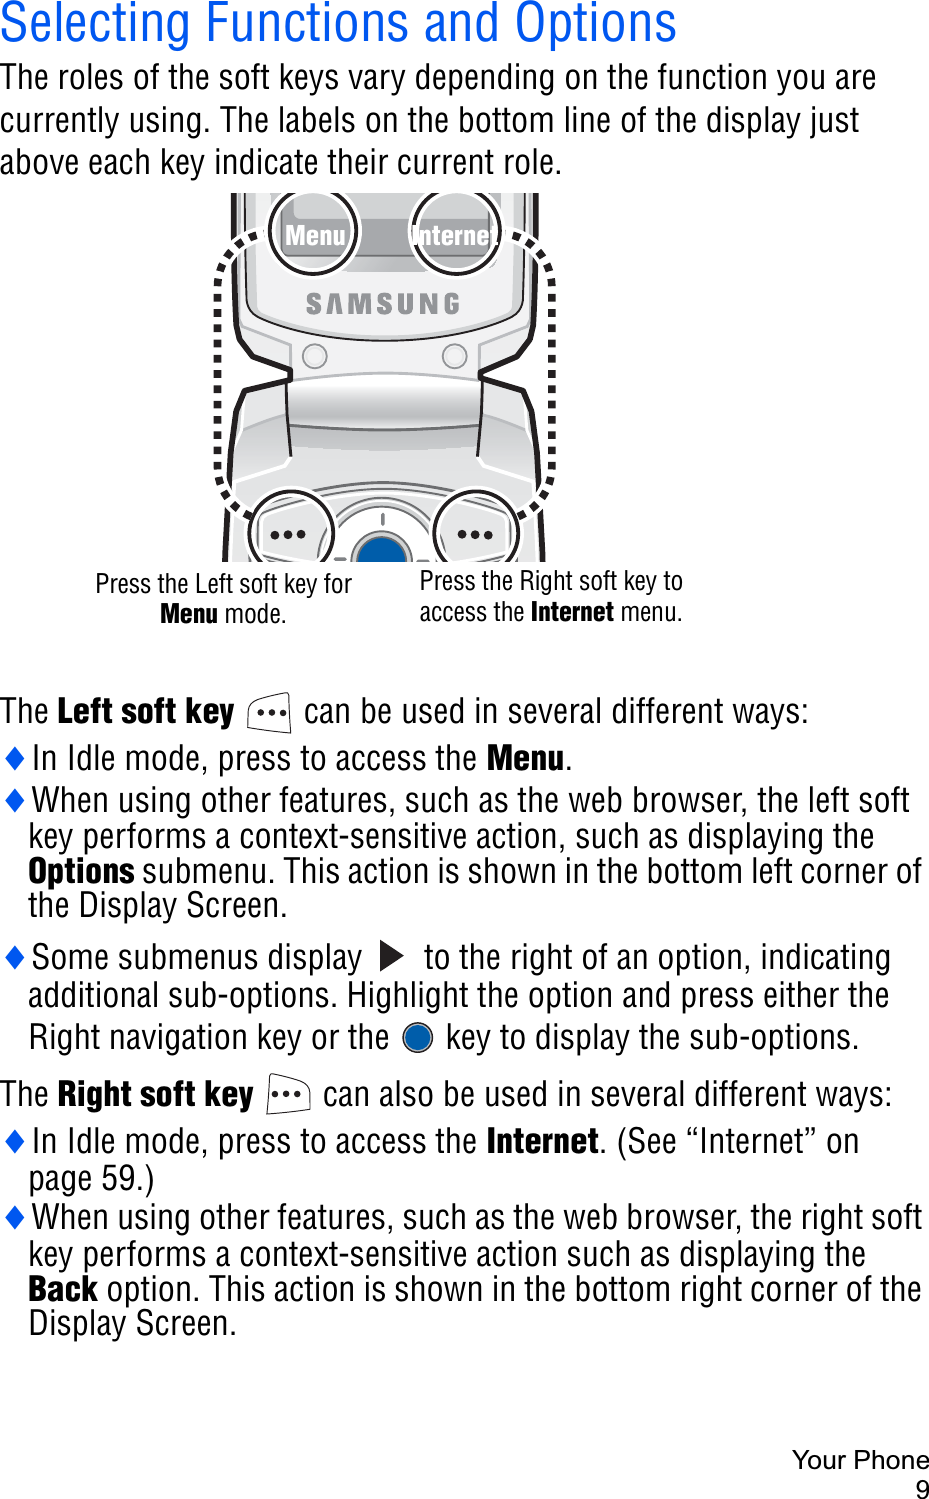 Your Phone9Selecting Functions and OptionsThe roles of the soft keys vary depending on the function you are currently using. The labels on the bottom line of the display just above each key indicate their current role.The Left soft key can be used in several different ways:iIn Idle mode, press to access the Menu.iWhen using other features, such as the web browser, the left soft key performs a context-sensitive action, such as displaying the Options submenu. This action is shown in the bottom left corner of the Display Screen.iSome submenus display   to the right of an option, indicating additional sub-options. Highlight the option and press either the Right navigation key or the   key to display the sub-options.The Right soft key  can also be used in several different ways:iIn Idle mode, press to access the Internet. (See “Internet” on page 59.)iWhen using other features, such as the web browser, the right soft key performs a context-sensitive action such as displaying the Back option. This action is shown in the bottom right corner of the Display Screen.Menu InternetPress the Left soft key for Menu mode.Press the Right soft key to access the Internet menu.